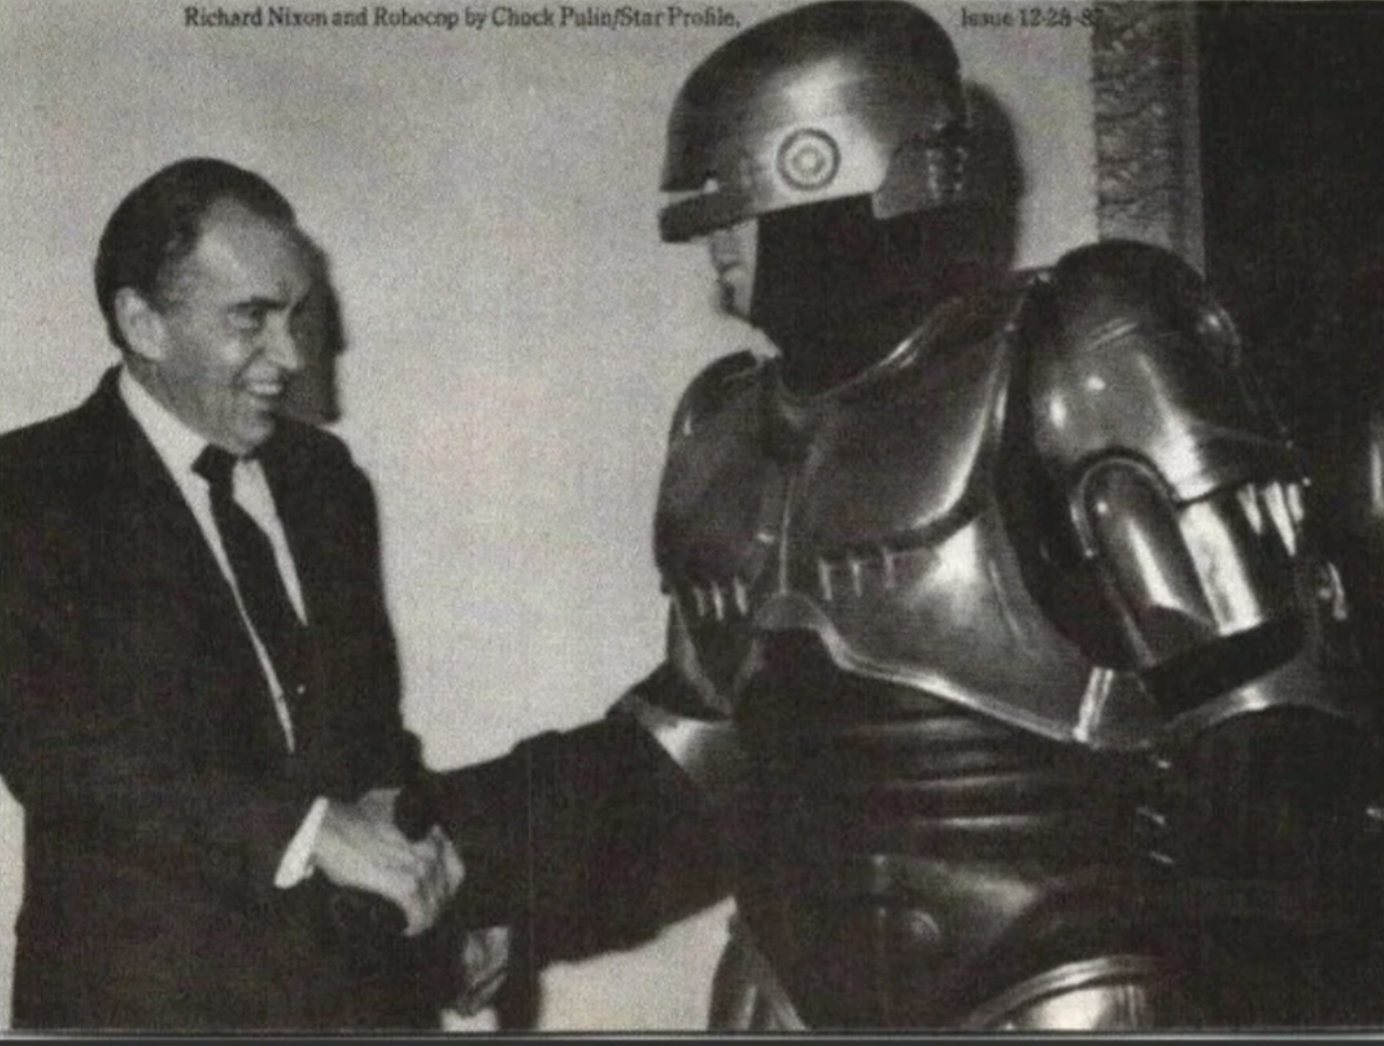 Richard M. Nixon is escorted by RoboCop at a national board meeting of the Boys Club of America. 1987.